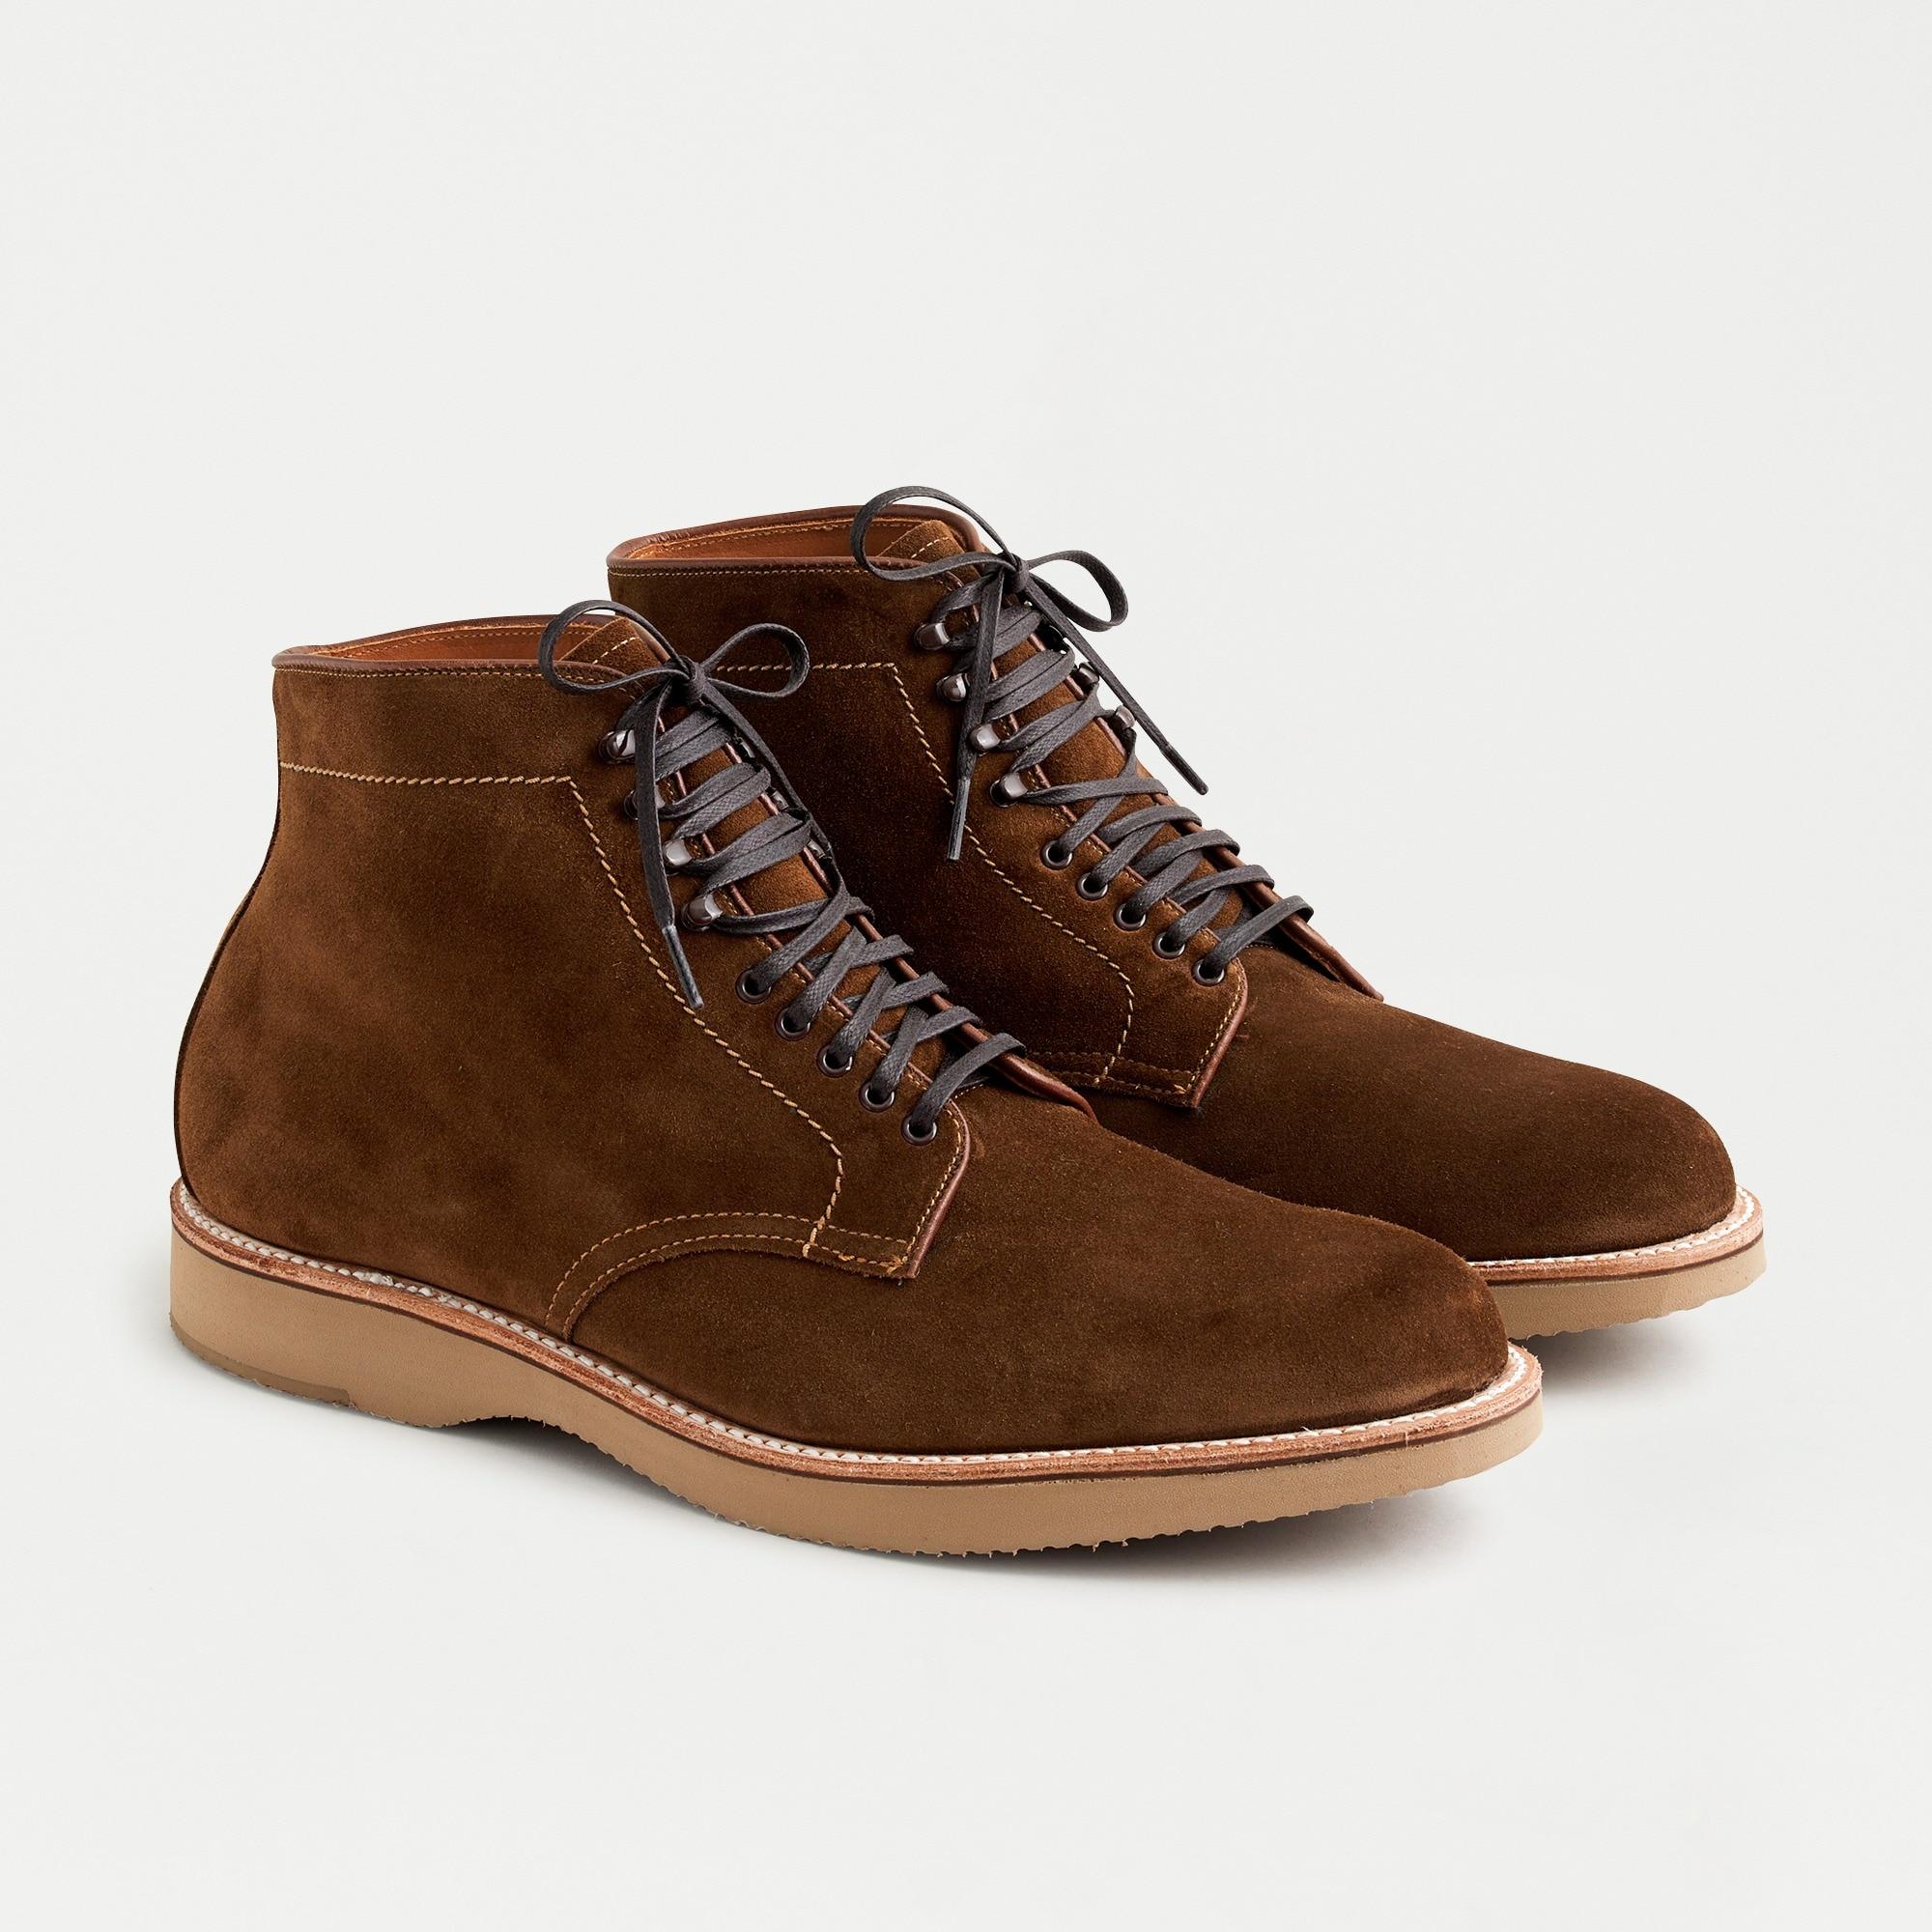 J.Crew Alden® For Plain Toe Boots In Suede in Brown for Men - Lyst